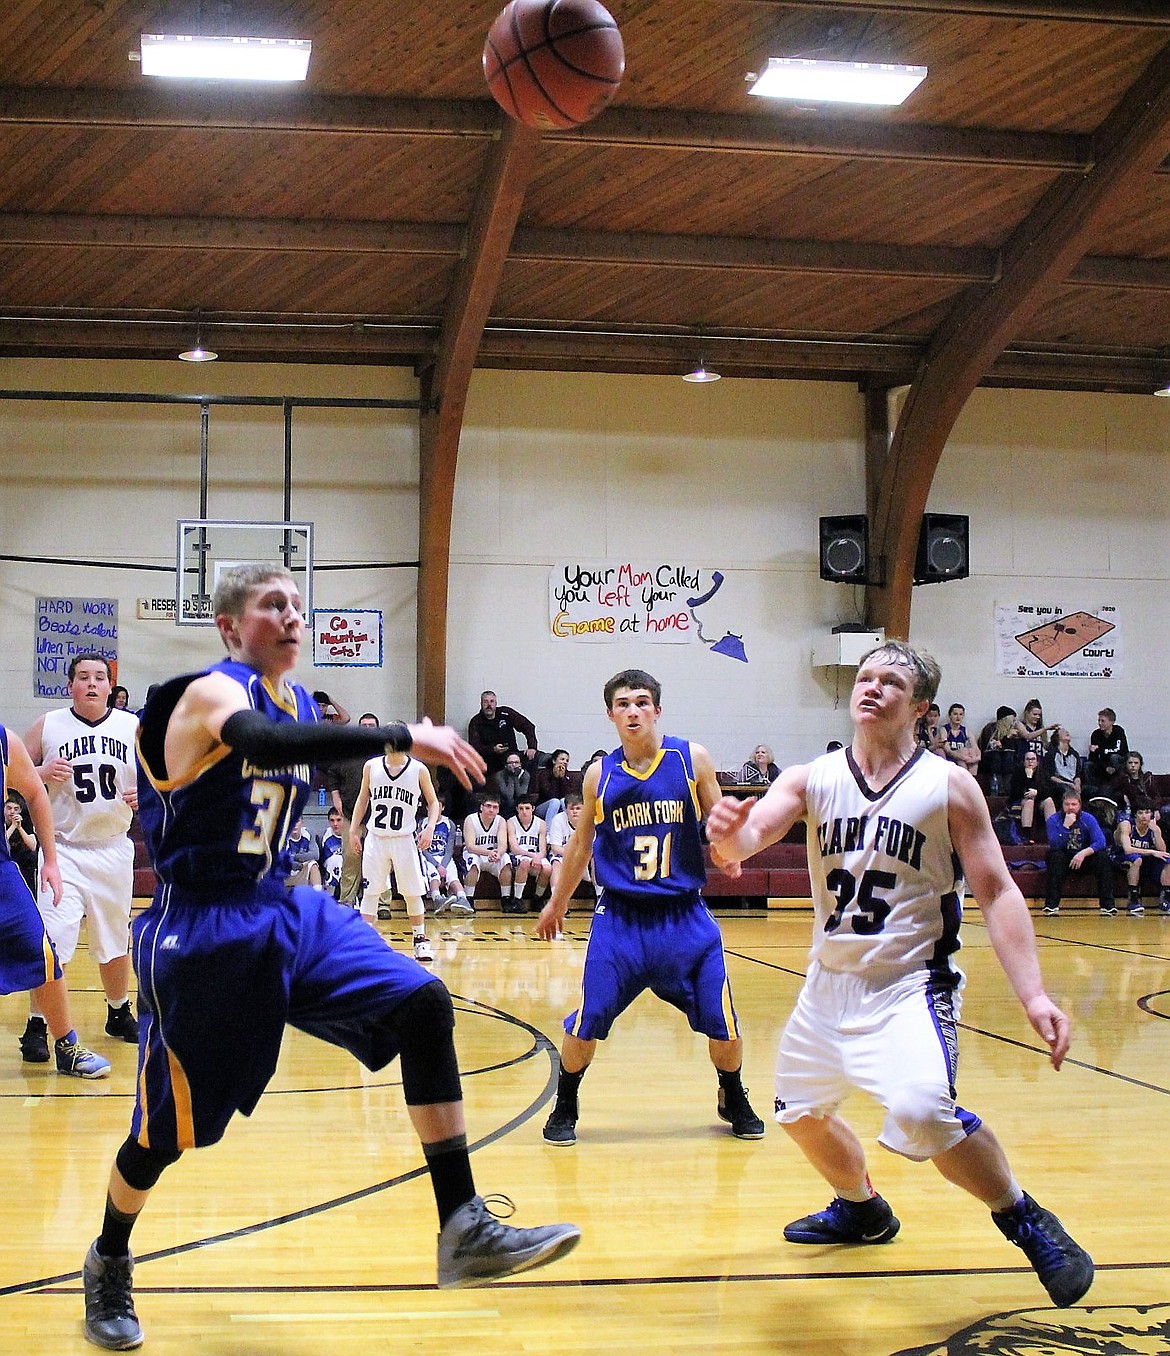 It was Clark Fork versus Clark Fork during Saturday&#146;s game in Alberton. Idaho won boys 59-28, the Lady Cats won 61-40.